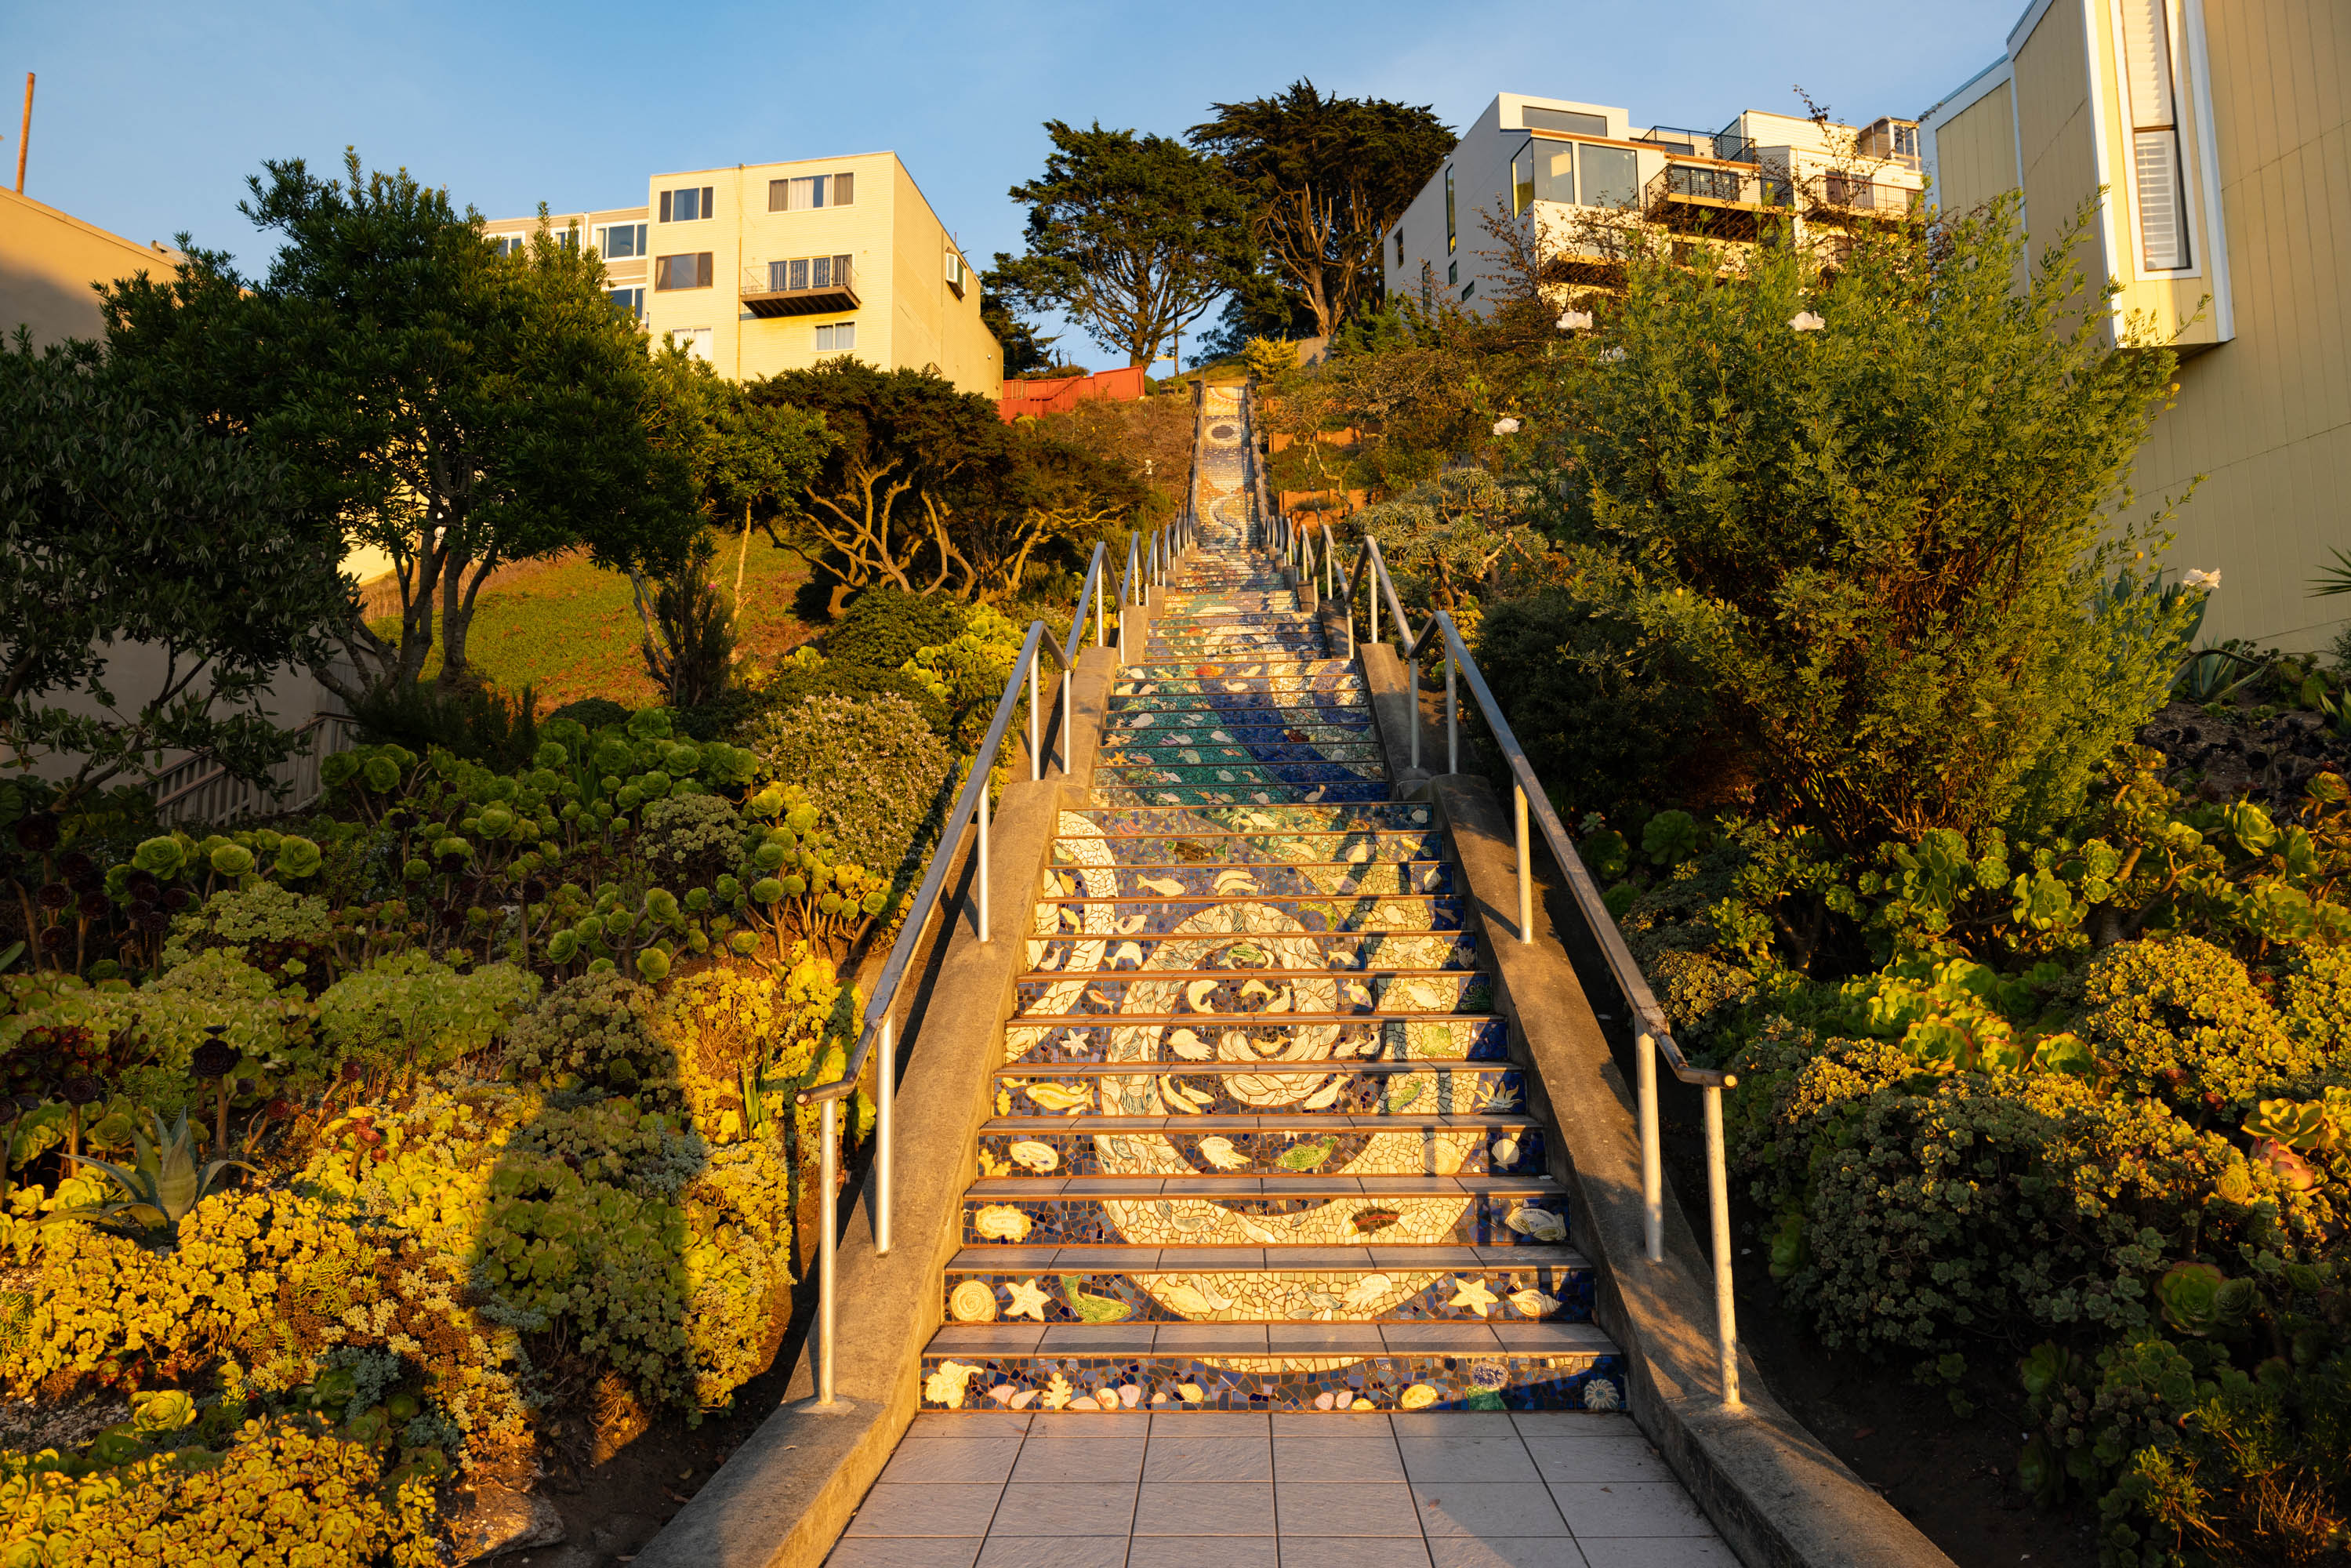 The sun hits a long tiled staircase with lush vegetation on either side.